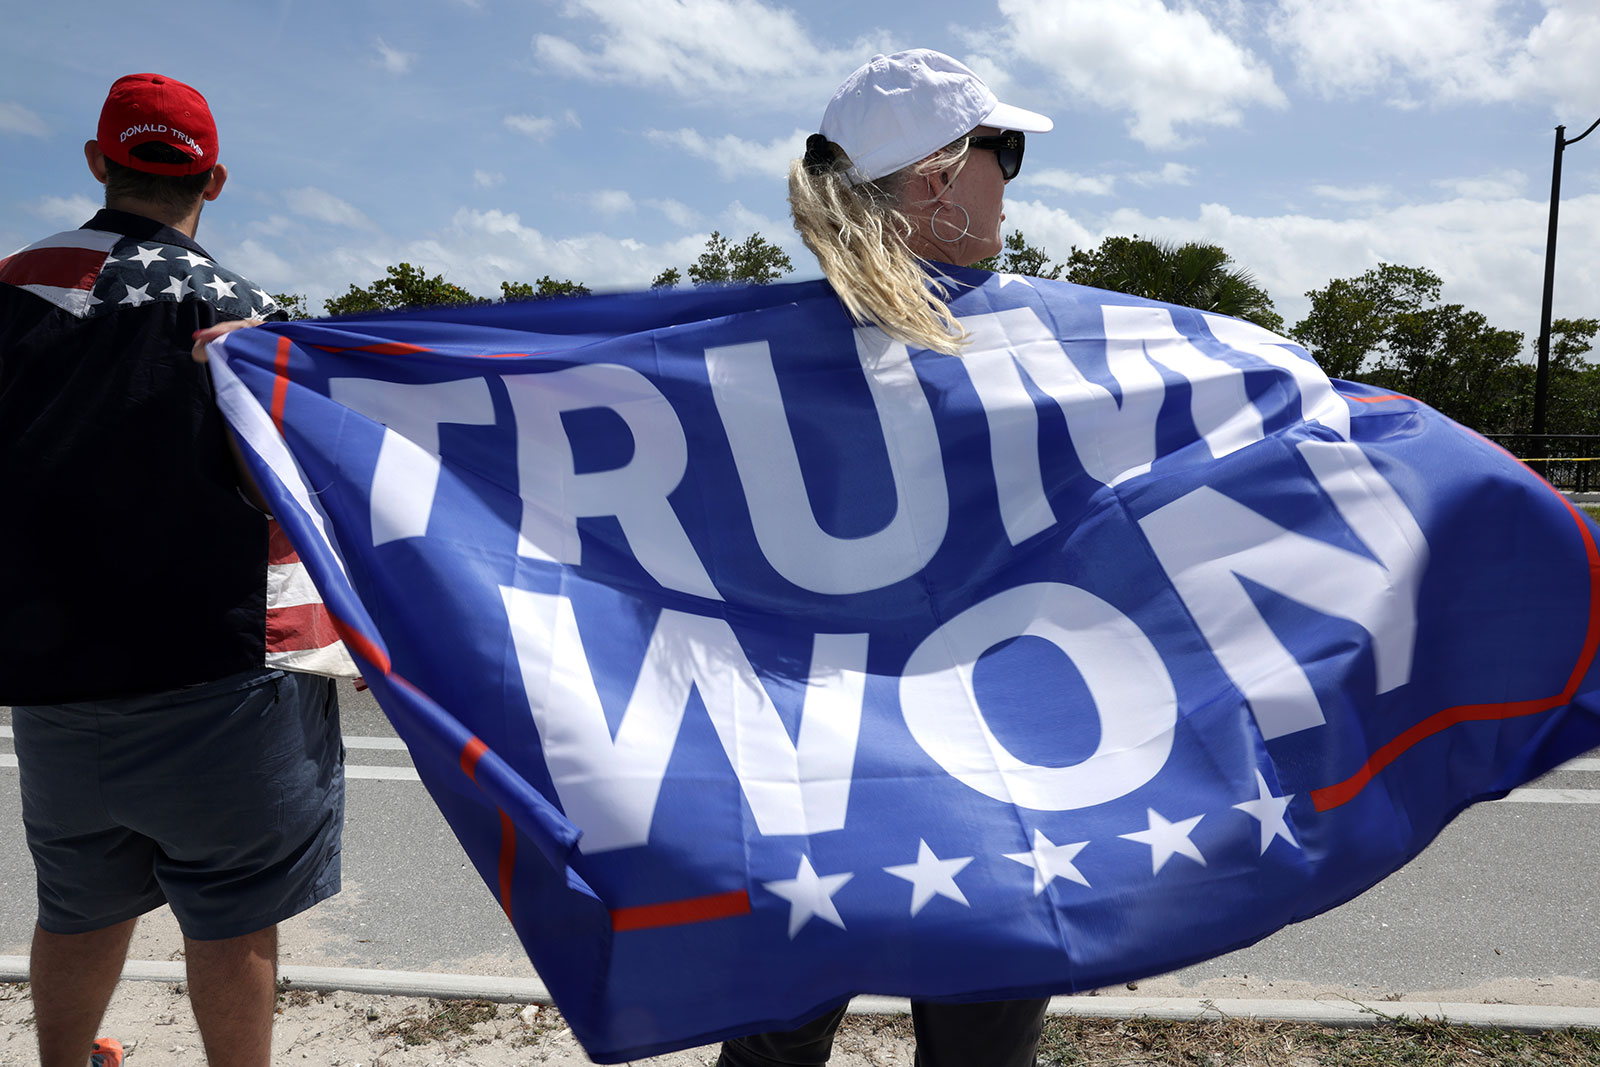 A supporter of former US President Donald Trump holds a flag that read "Trump Won" to show support near his Mar-a-Lago home on March 31 in Palm Beach, Florida.